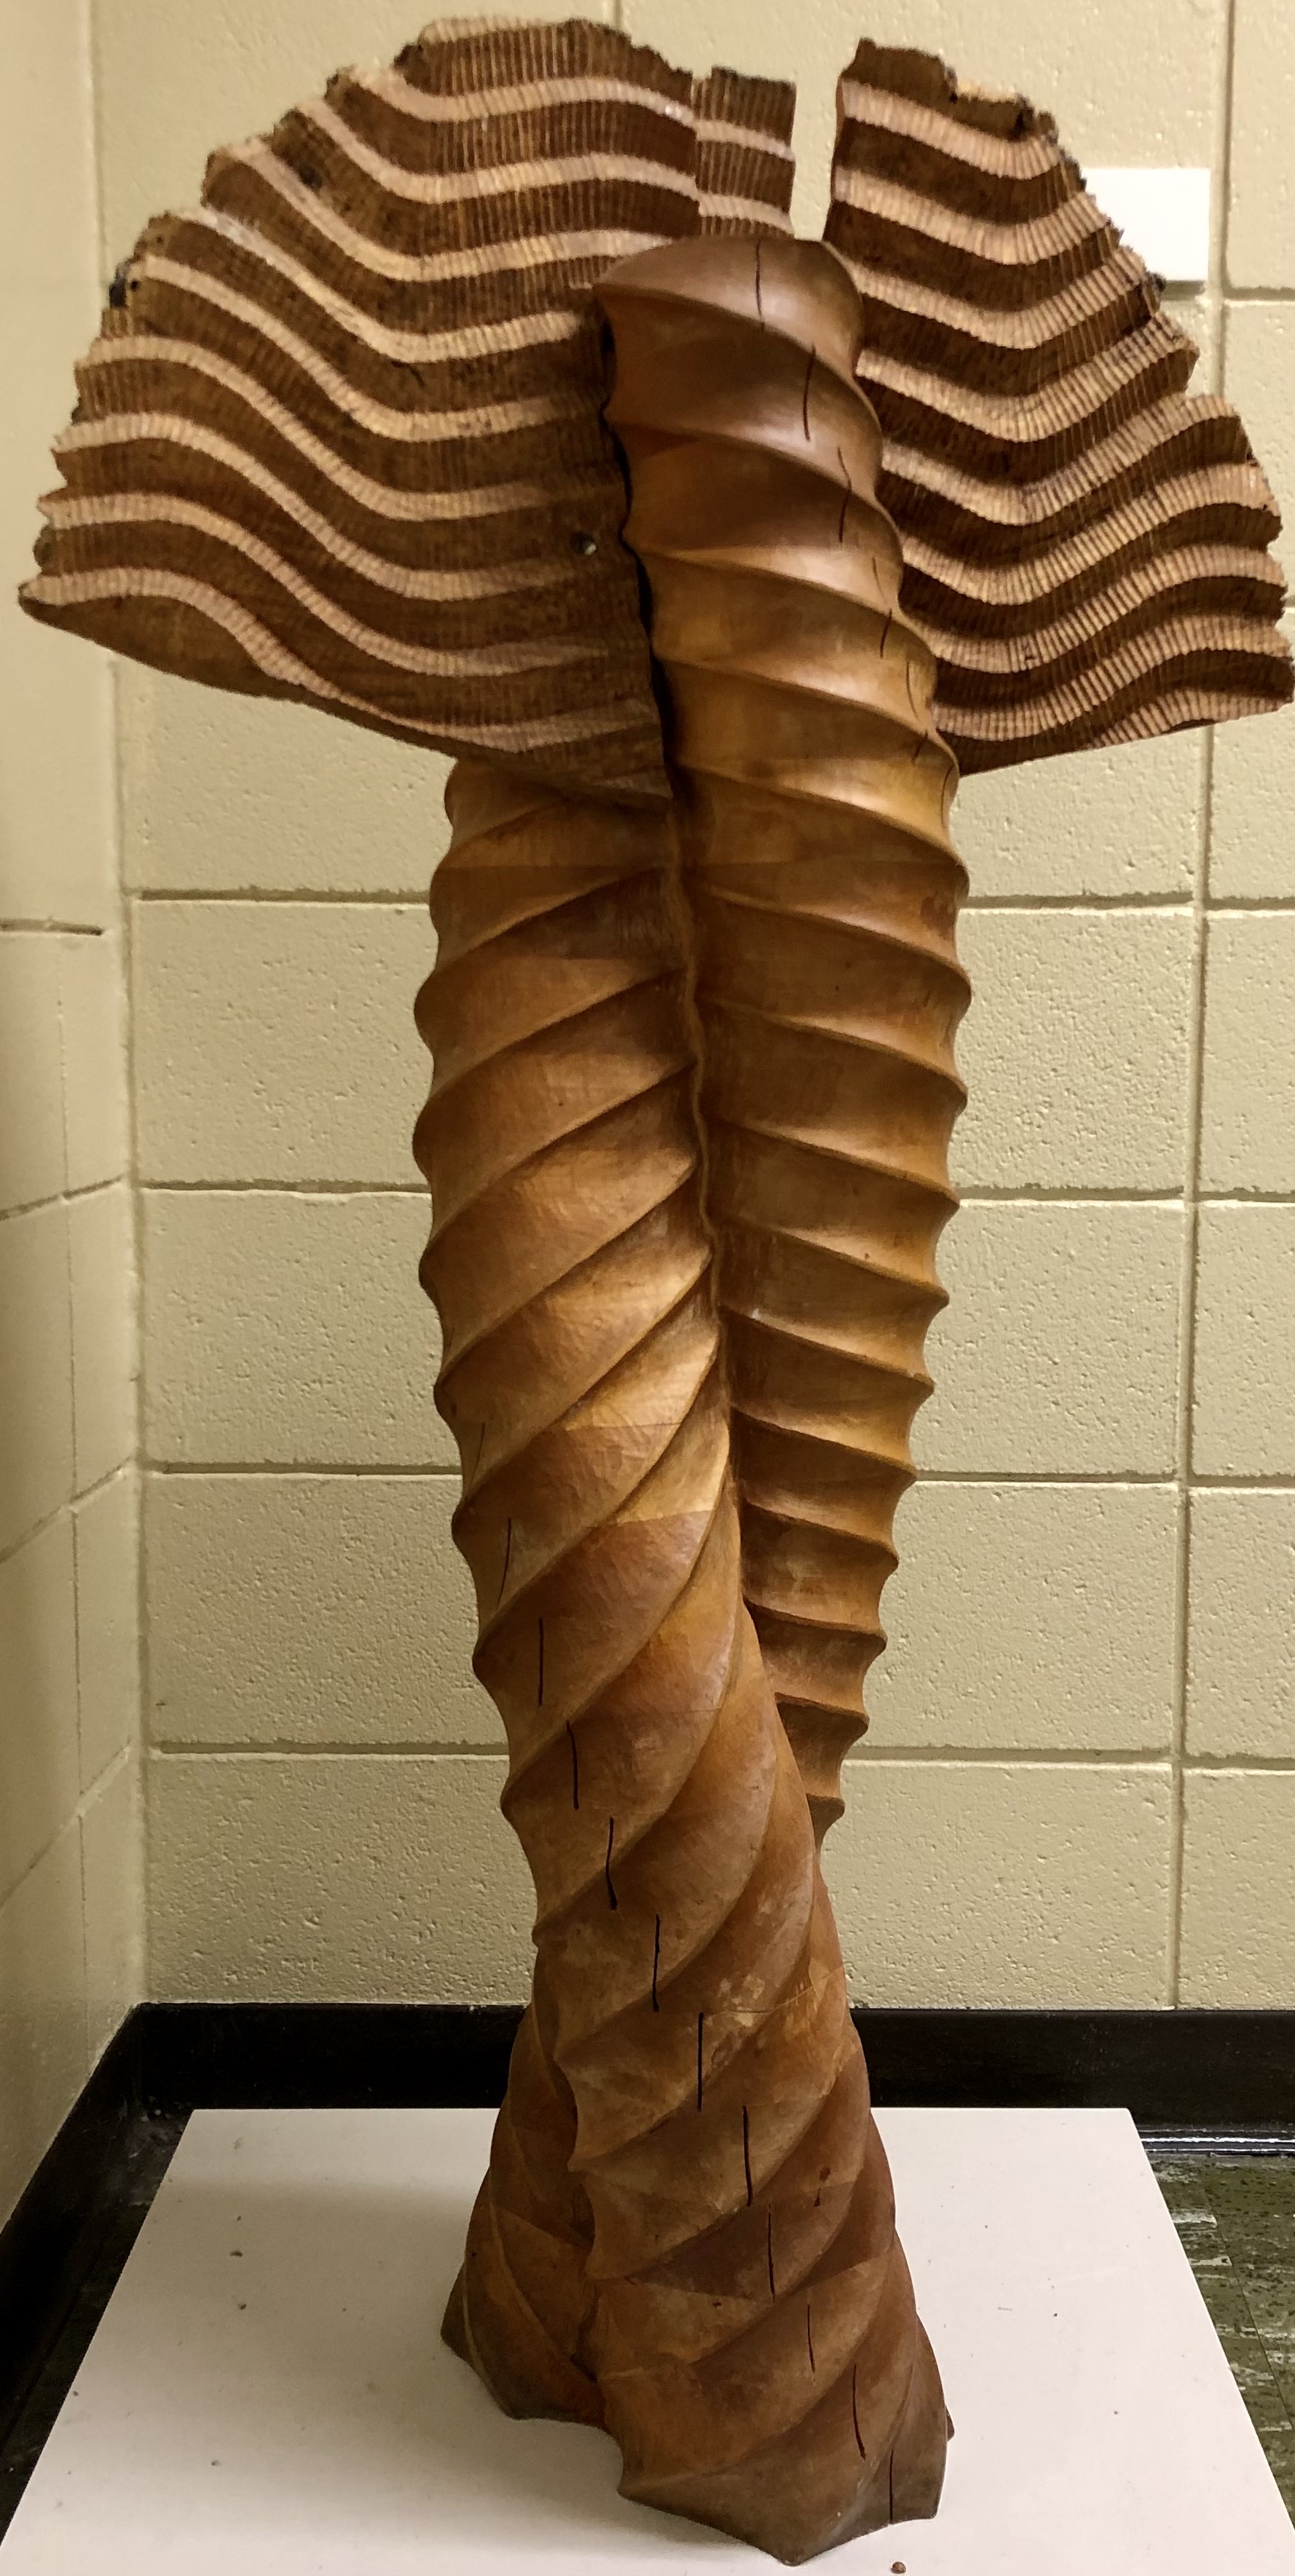 This is a wooden sculpture of two tubular spiraling vertical forms with carved wings attached at the top. 